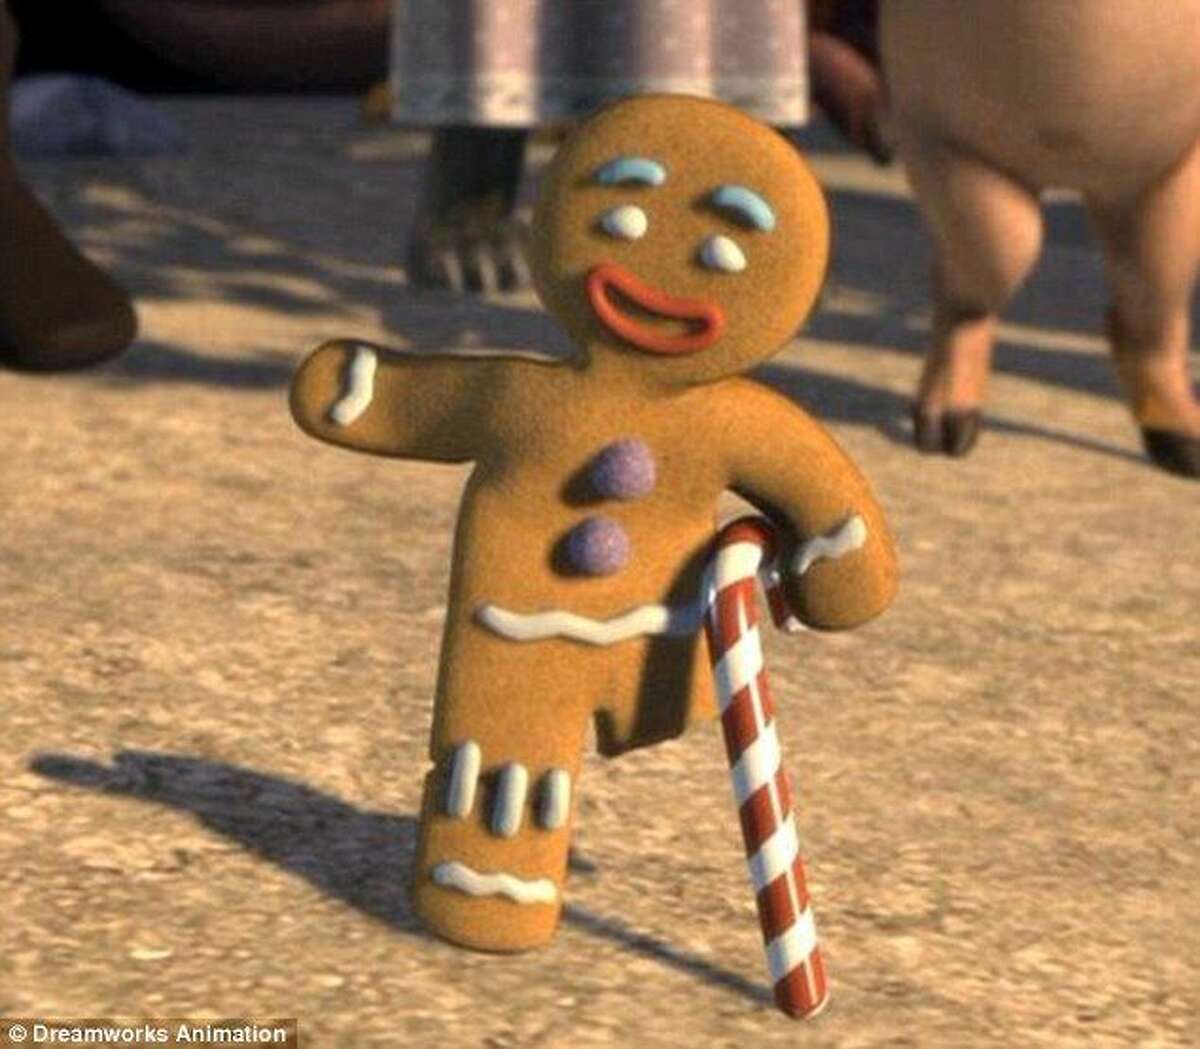 SPOILER ALERT! The Gingerbread Man, AKA Gingy, survives the torture inflicted on him by Lord Farquaad (John Lithgow) in 2001's "Shrek," but not without some major physical and emotional damage. Tough stuff for a cookie in a kids' movie. (At least he kept his gumdrop buttons)